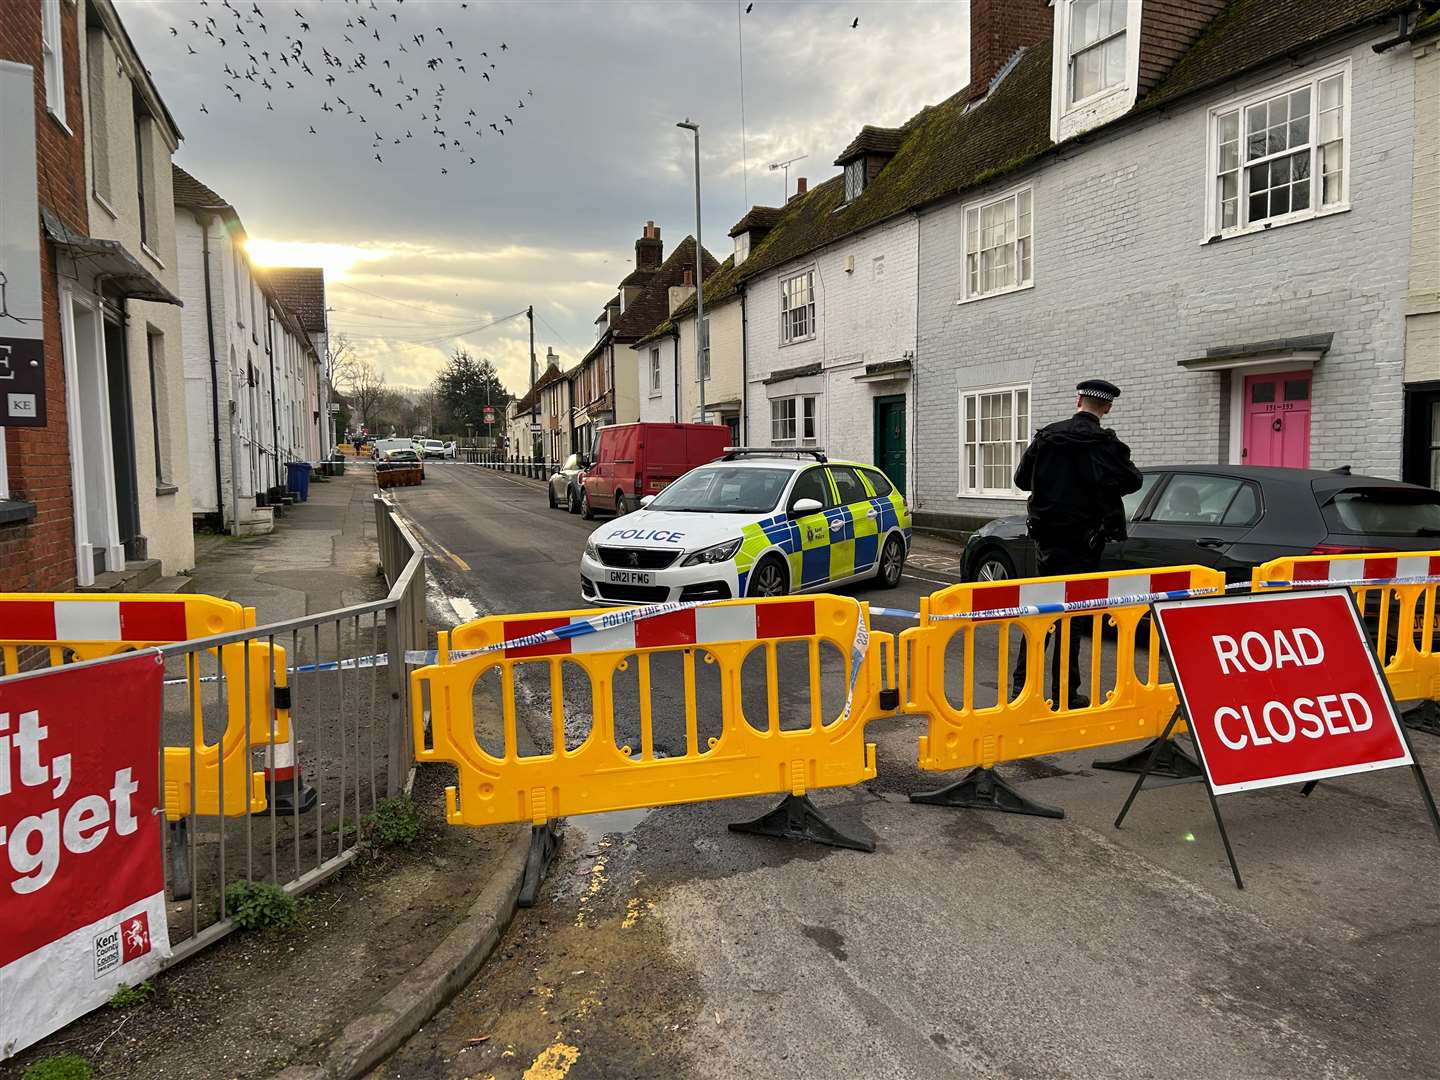 Police have cordoned off the main route through a village after unconfirmed reports of a stabbing